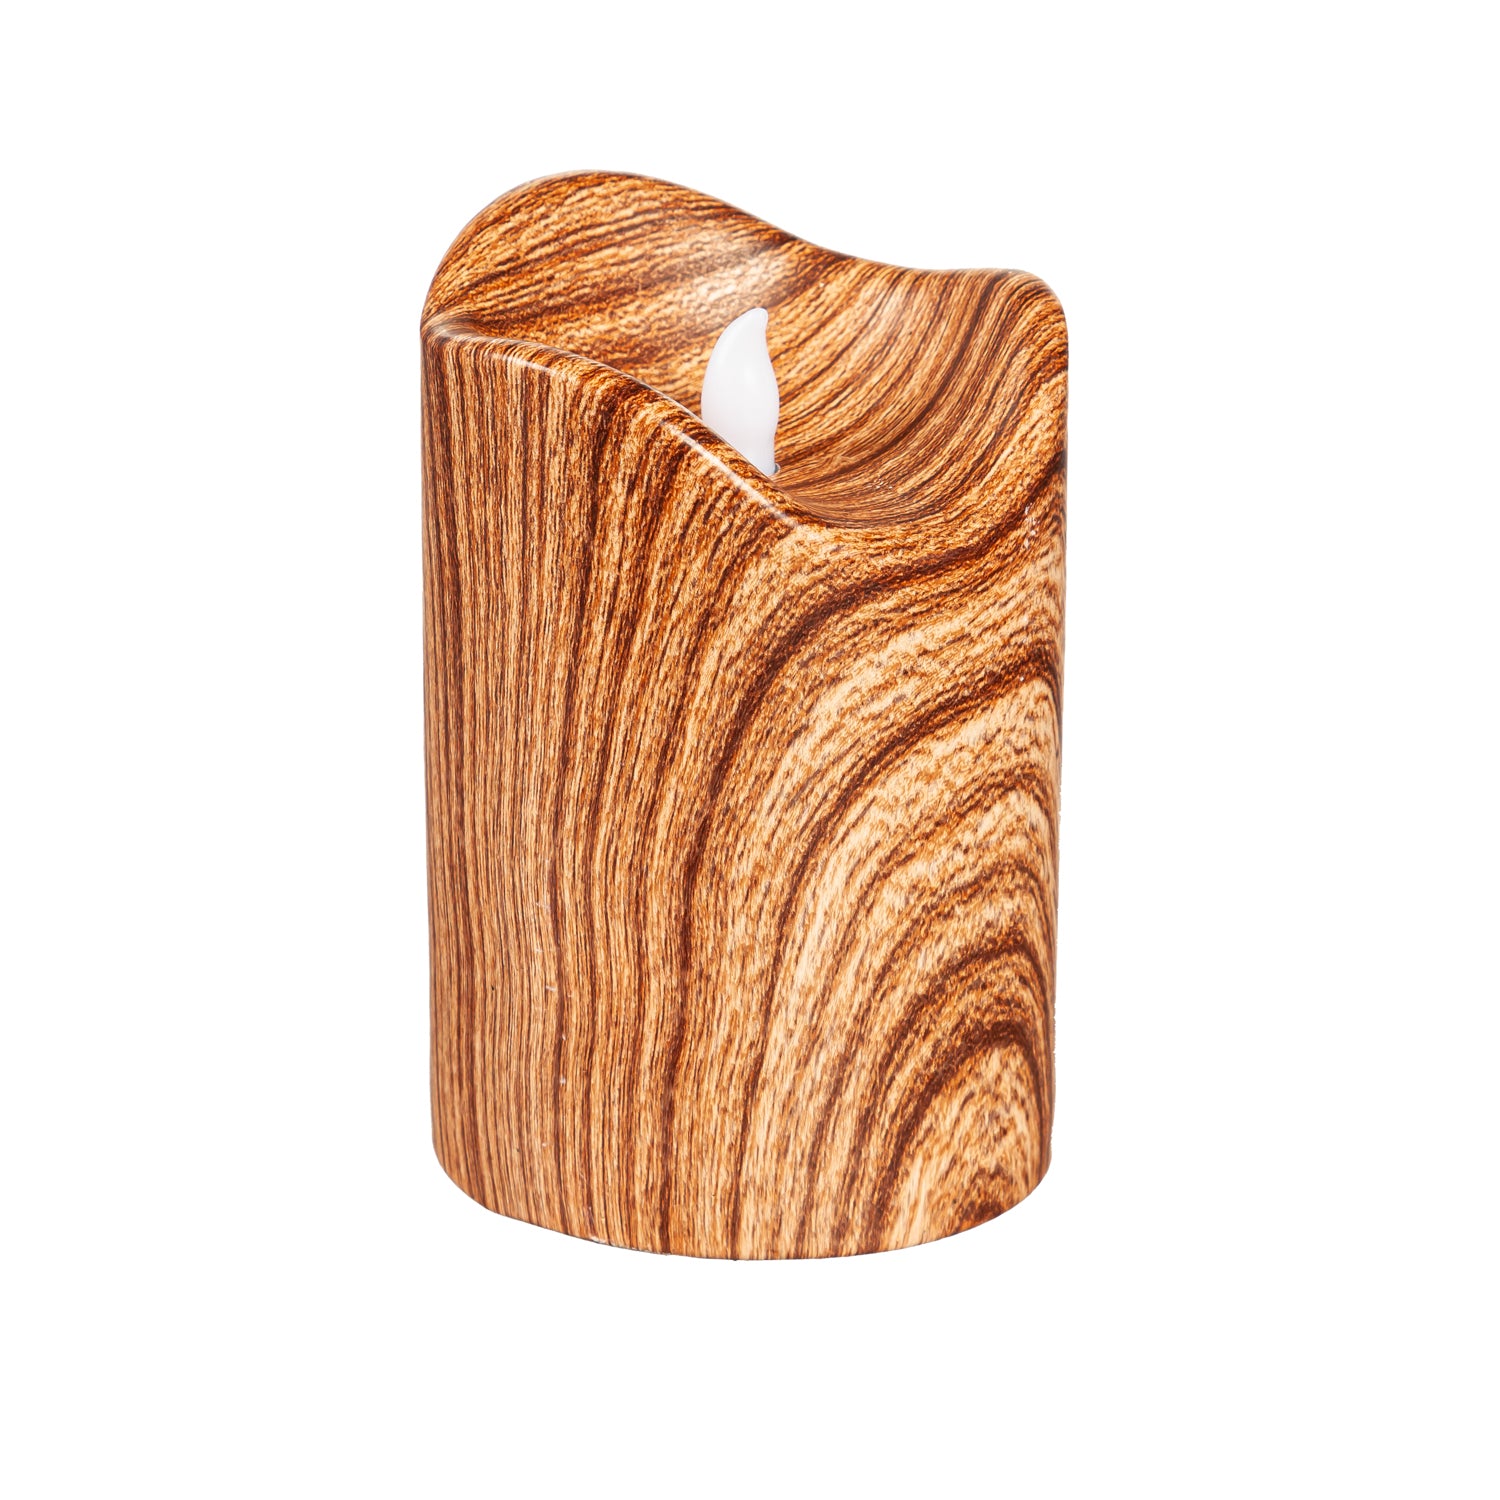 LED Round Cement Candle with Natural Wood Pattern, Set of 2